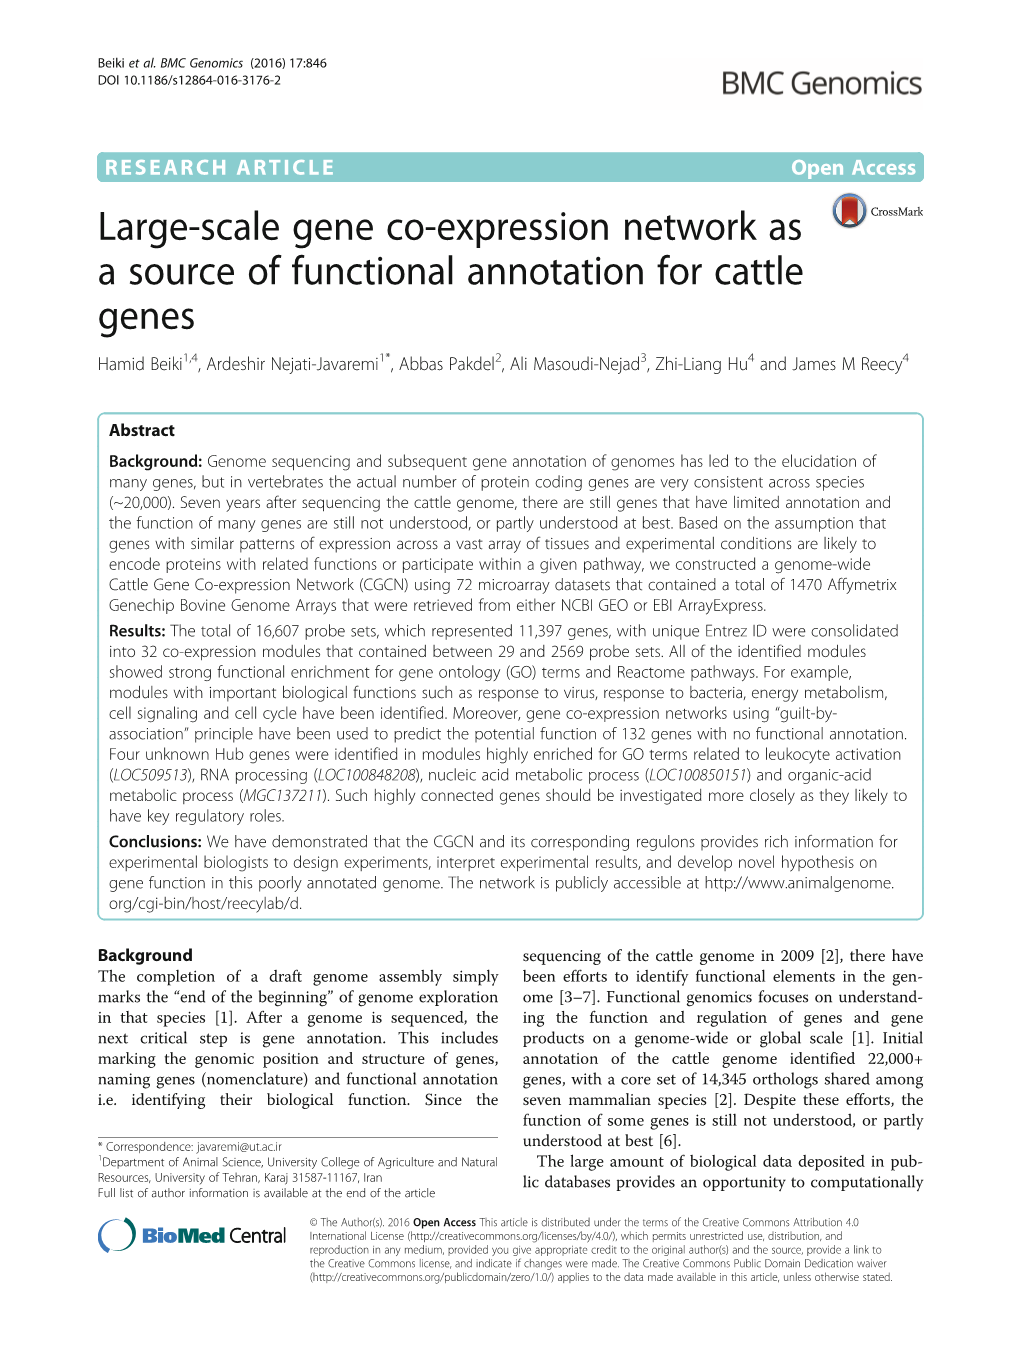 Large-Scale Gene Co-Expression Network As a Source of Functional Annotation for Cattle Genes